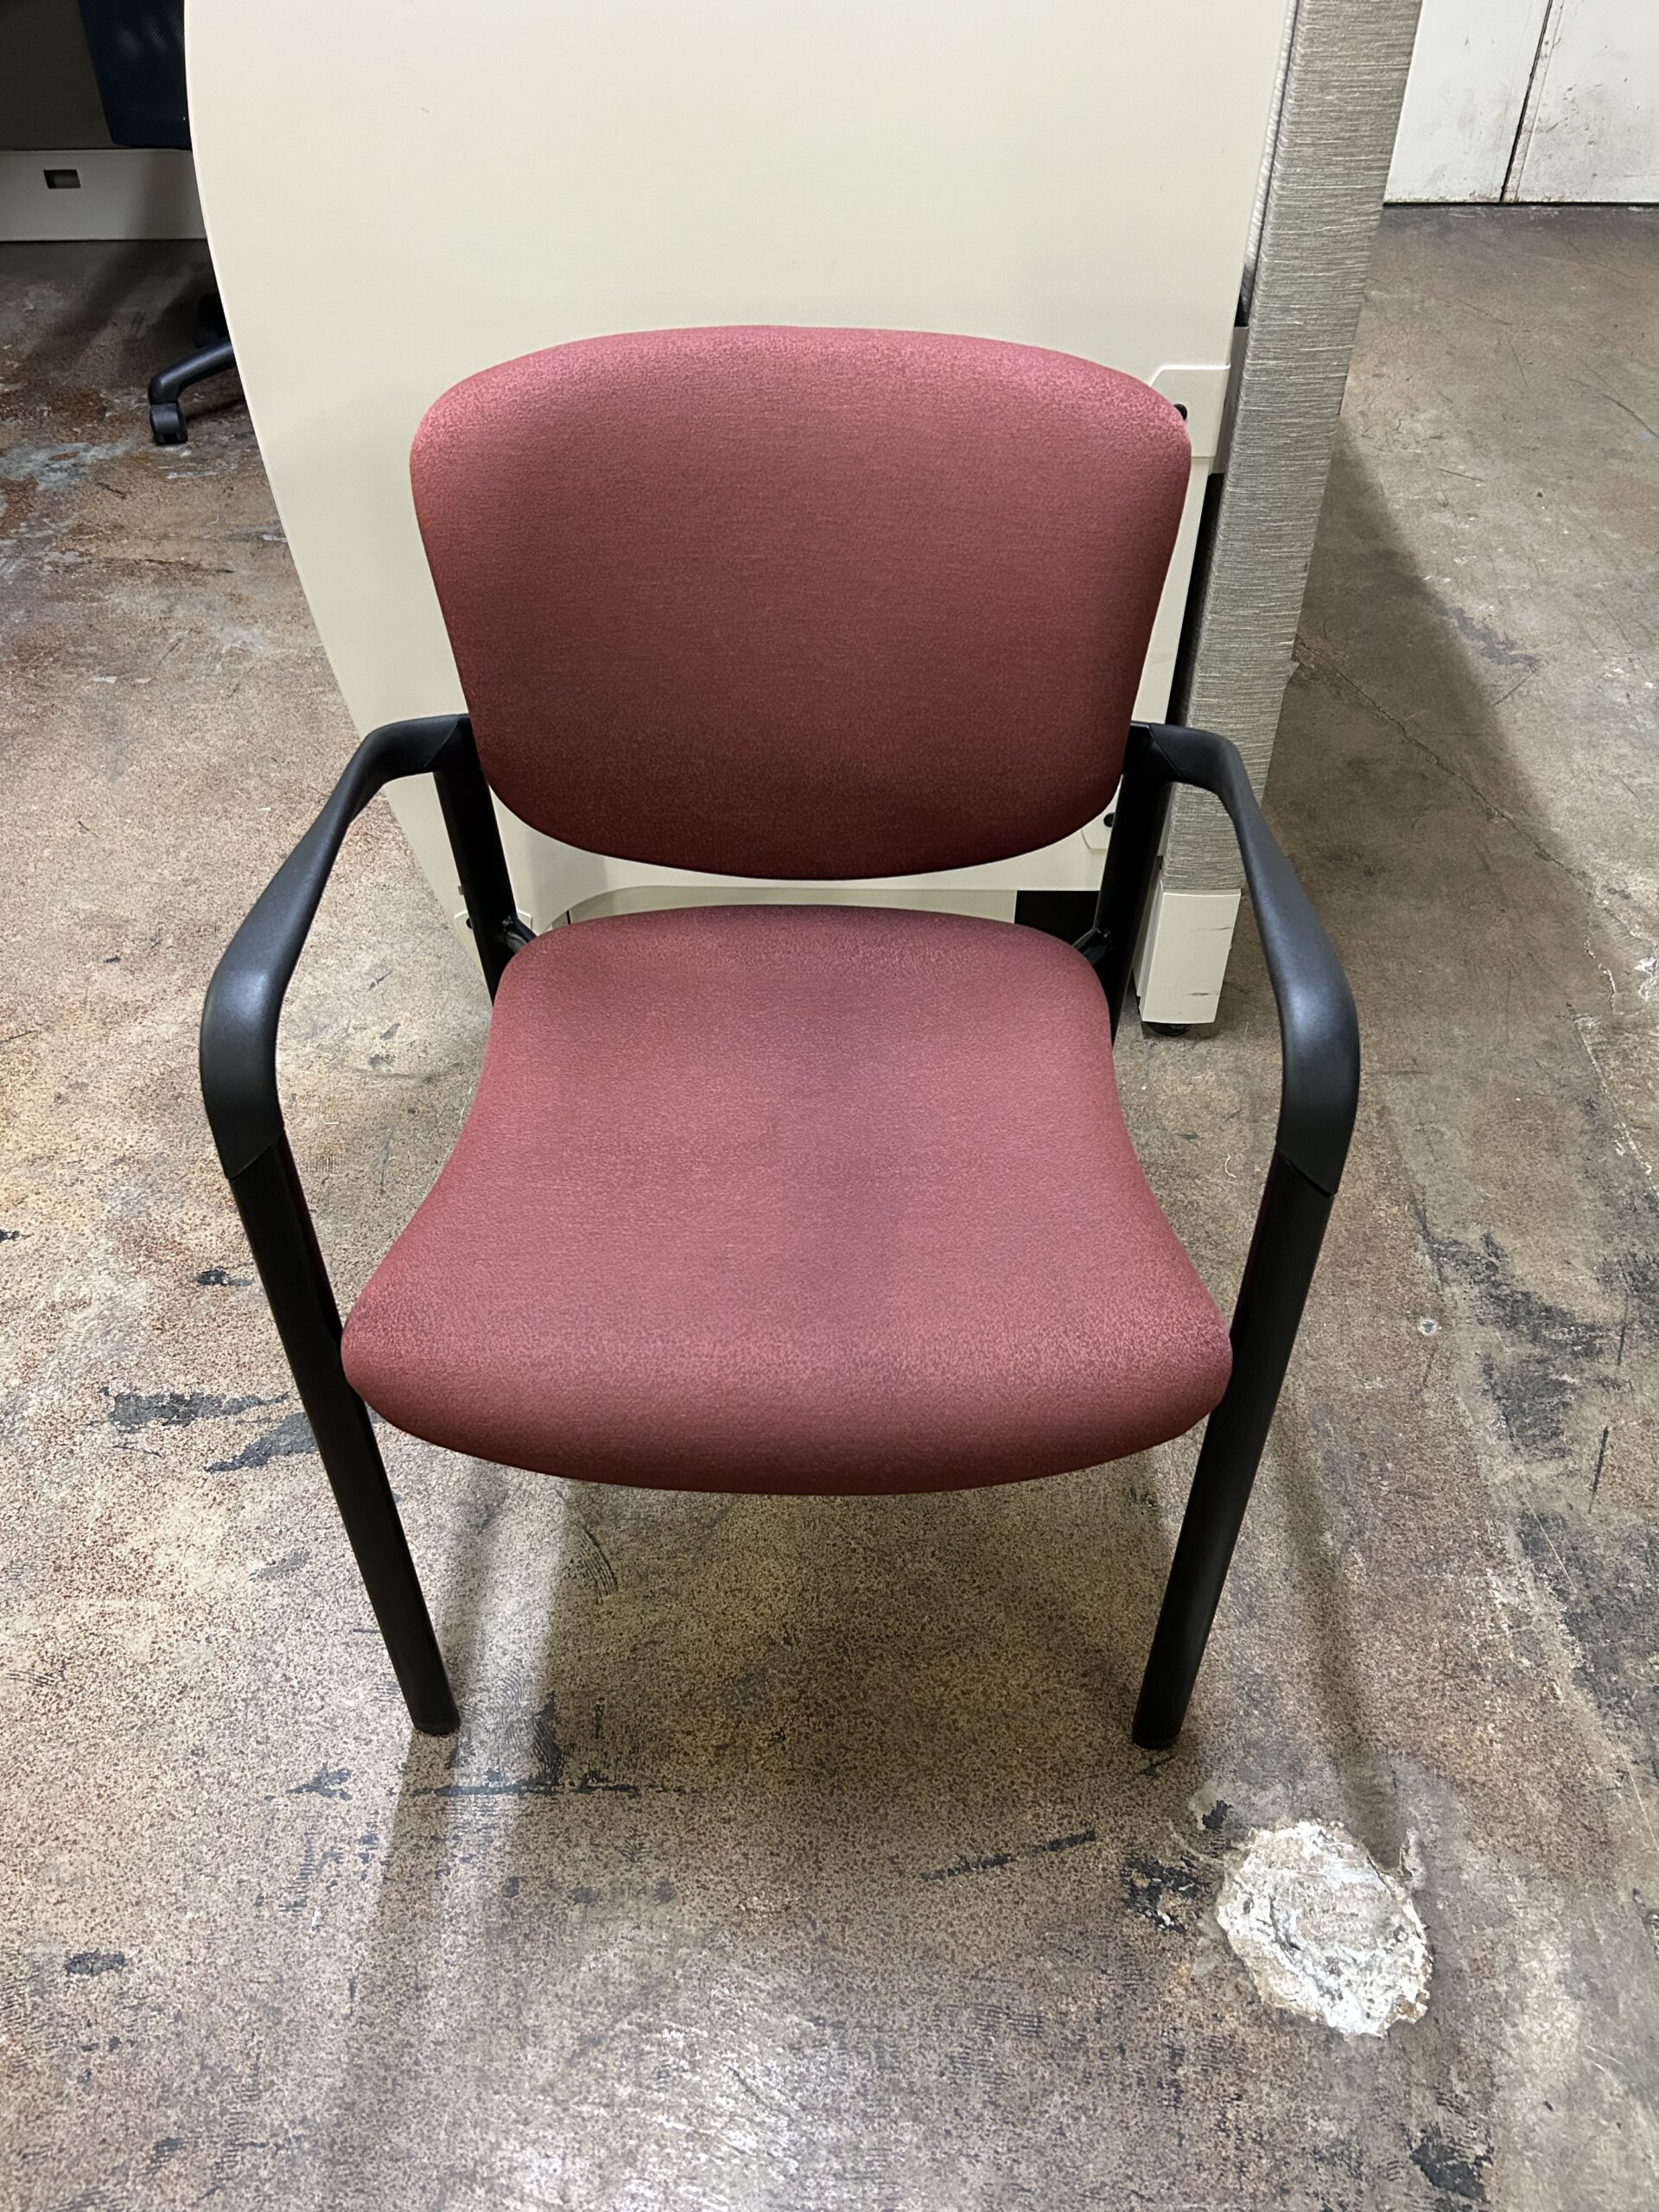 Used Red Haworth Improv Side Chair with Arms Stackable